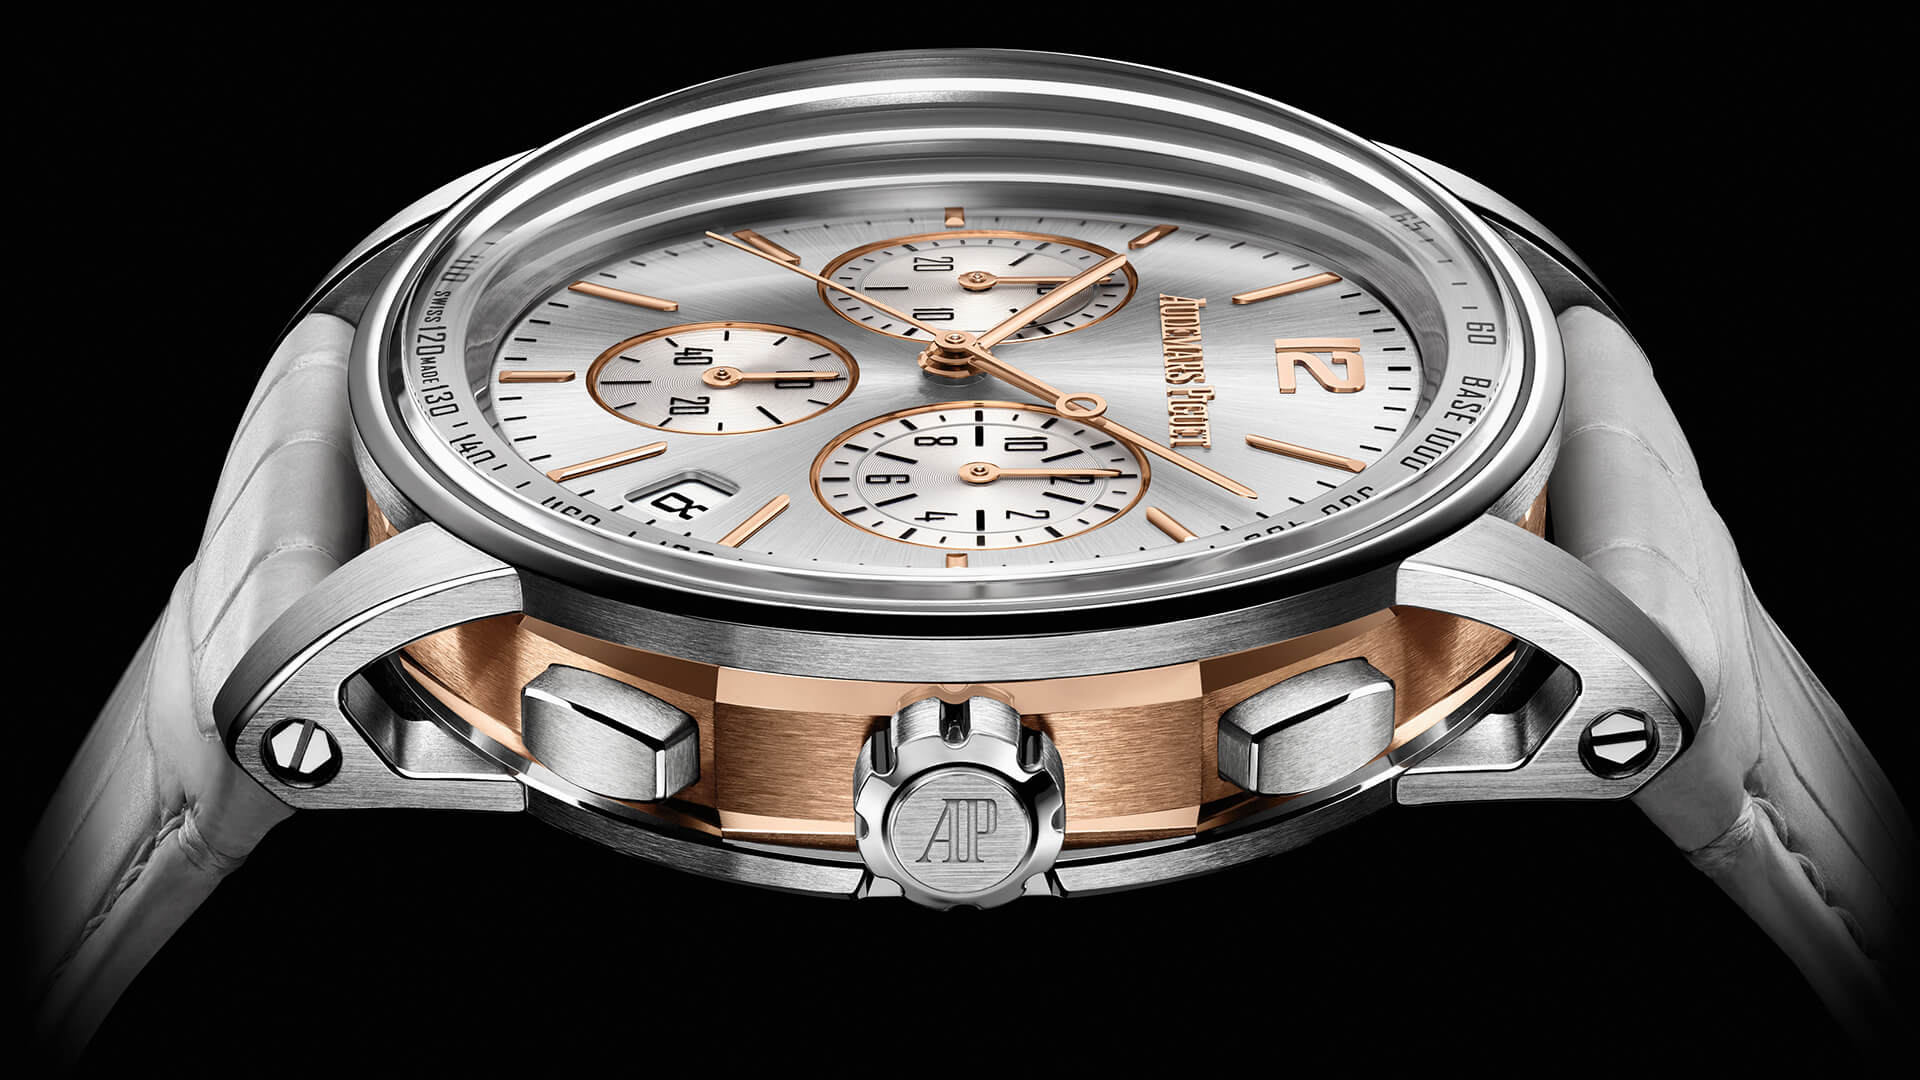 Audemars Piguet Updates The Code 11.59 With New Dial Colors And Two Tone Case Options